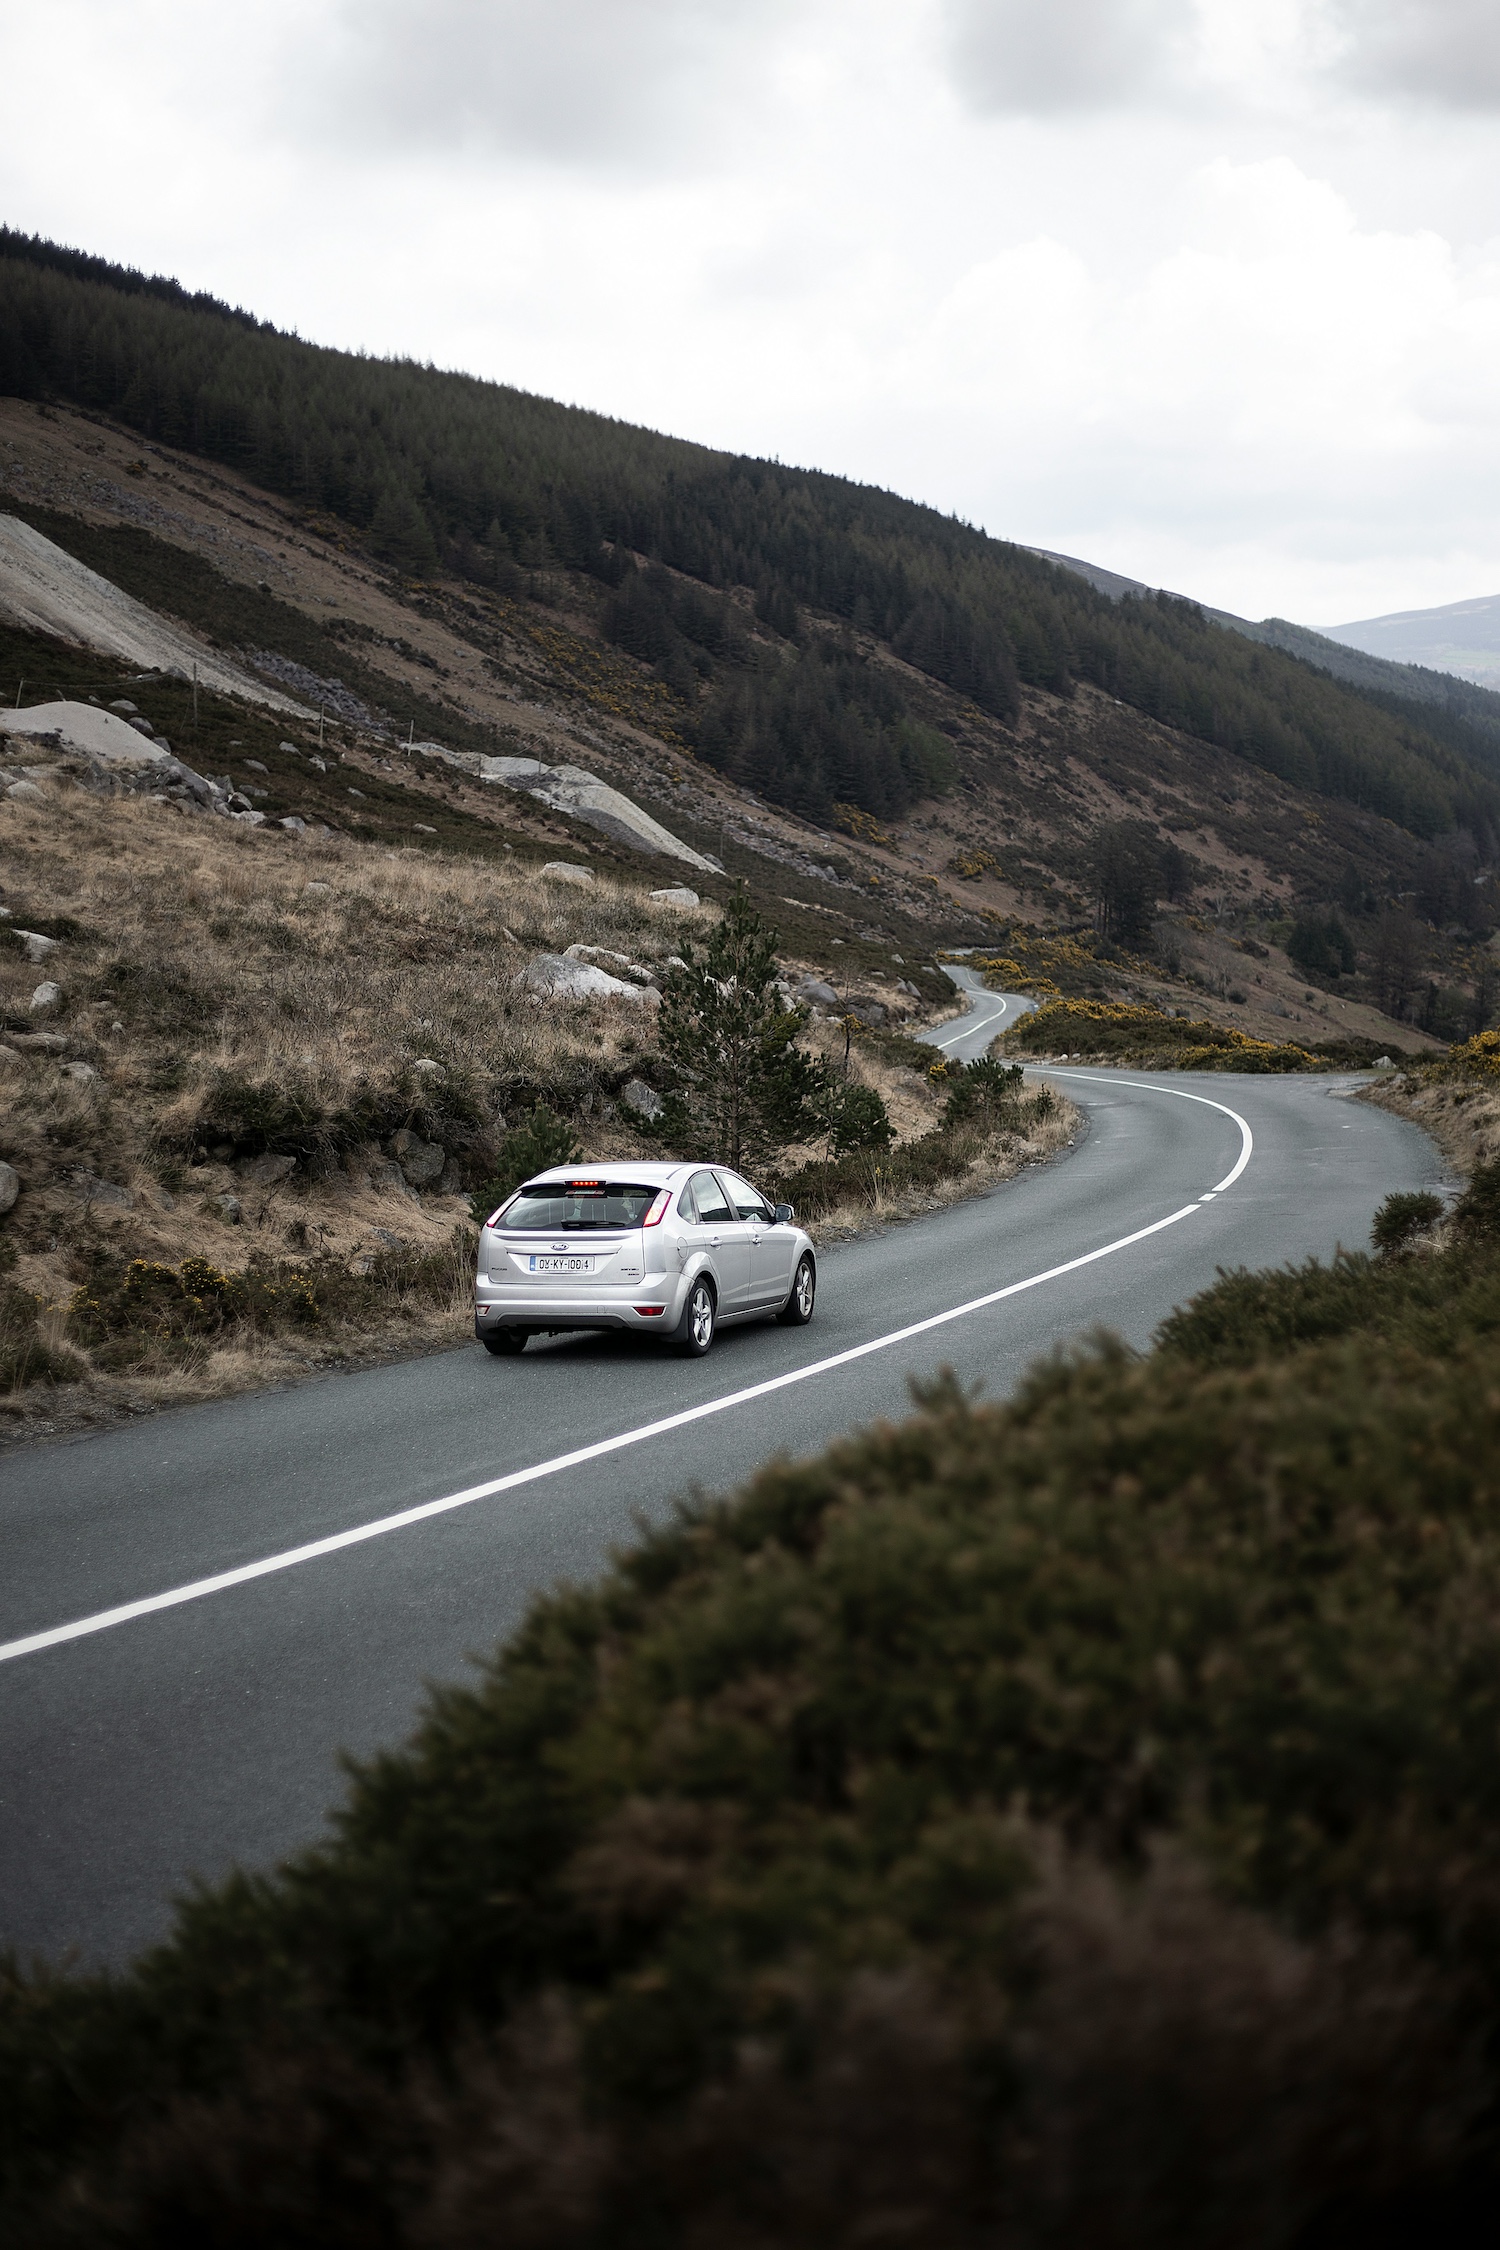 Ford Focus driving on an Irish country road